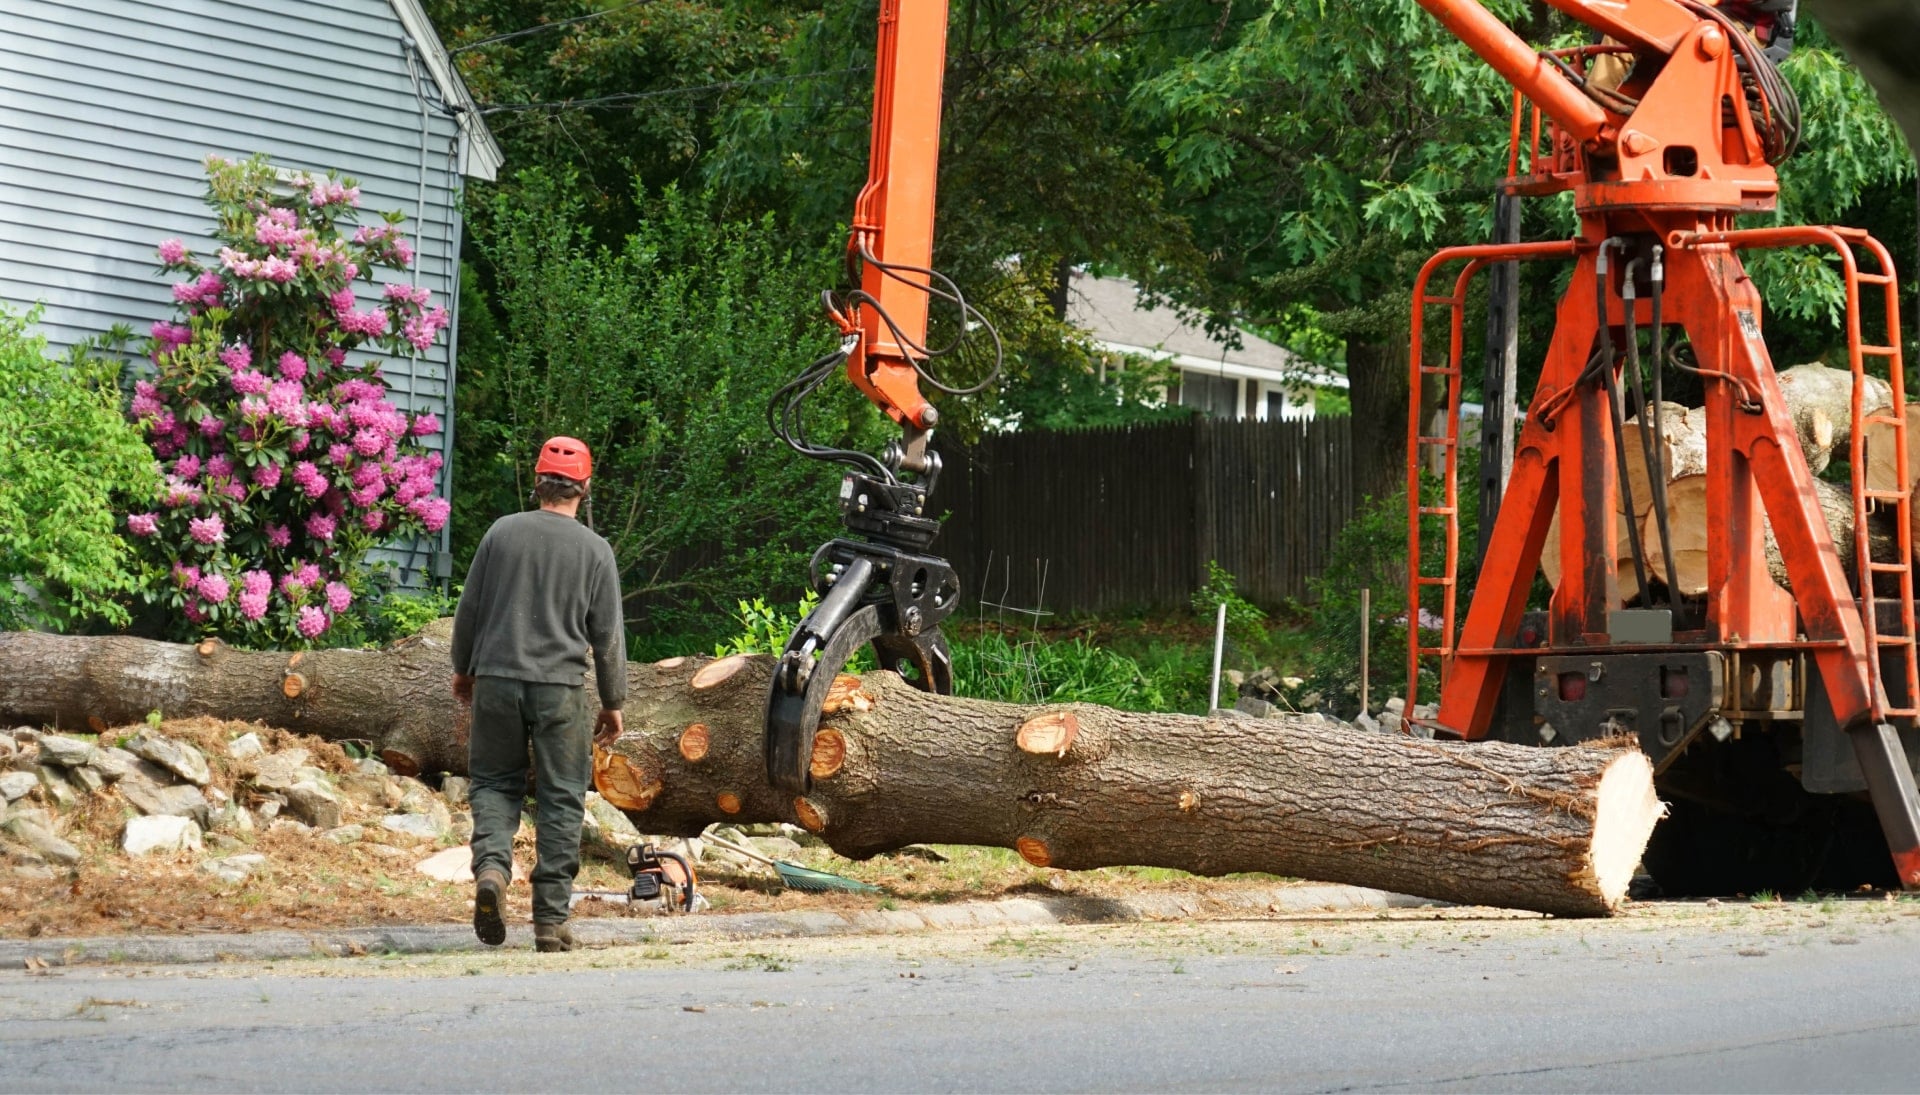 Local partner for Tree removal services in Gig Harbor